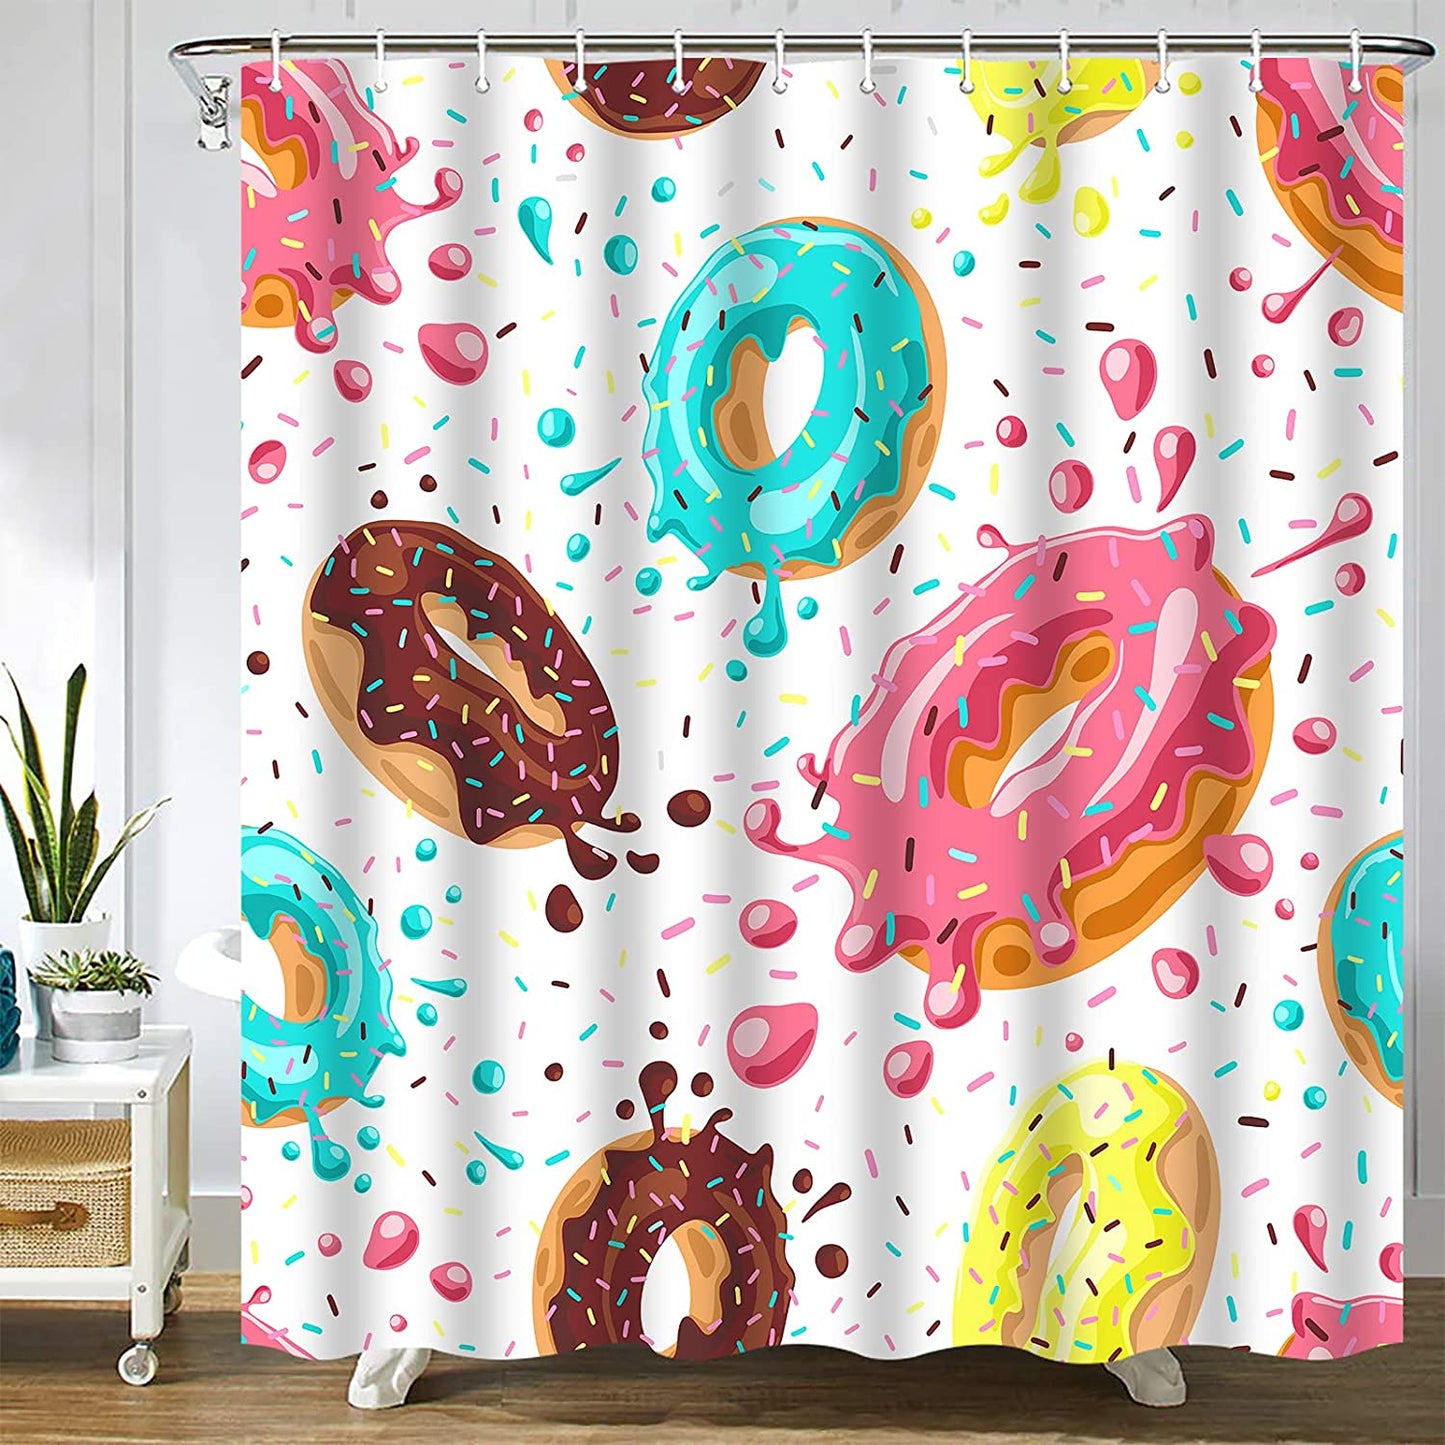 Splashes of Colorful Donut Shower Curtain